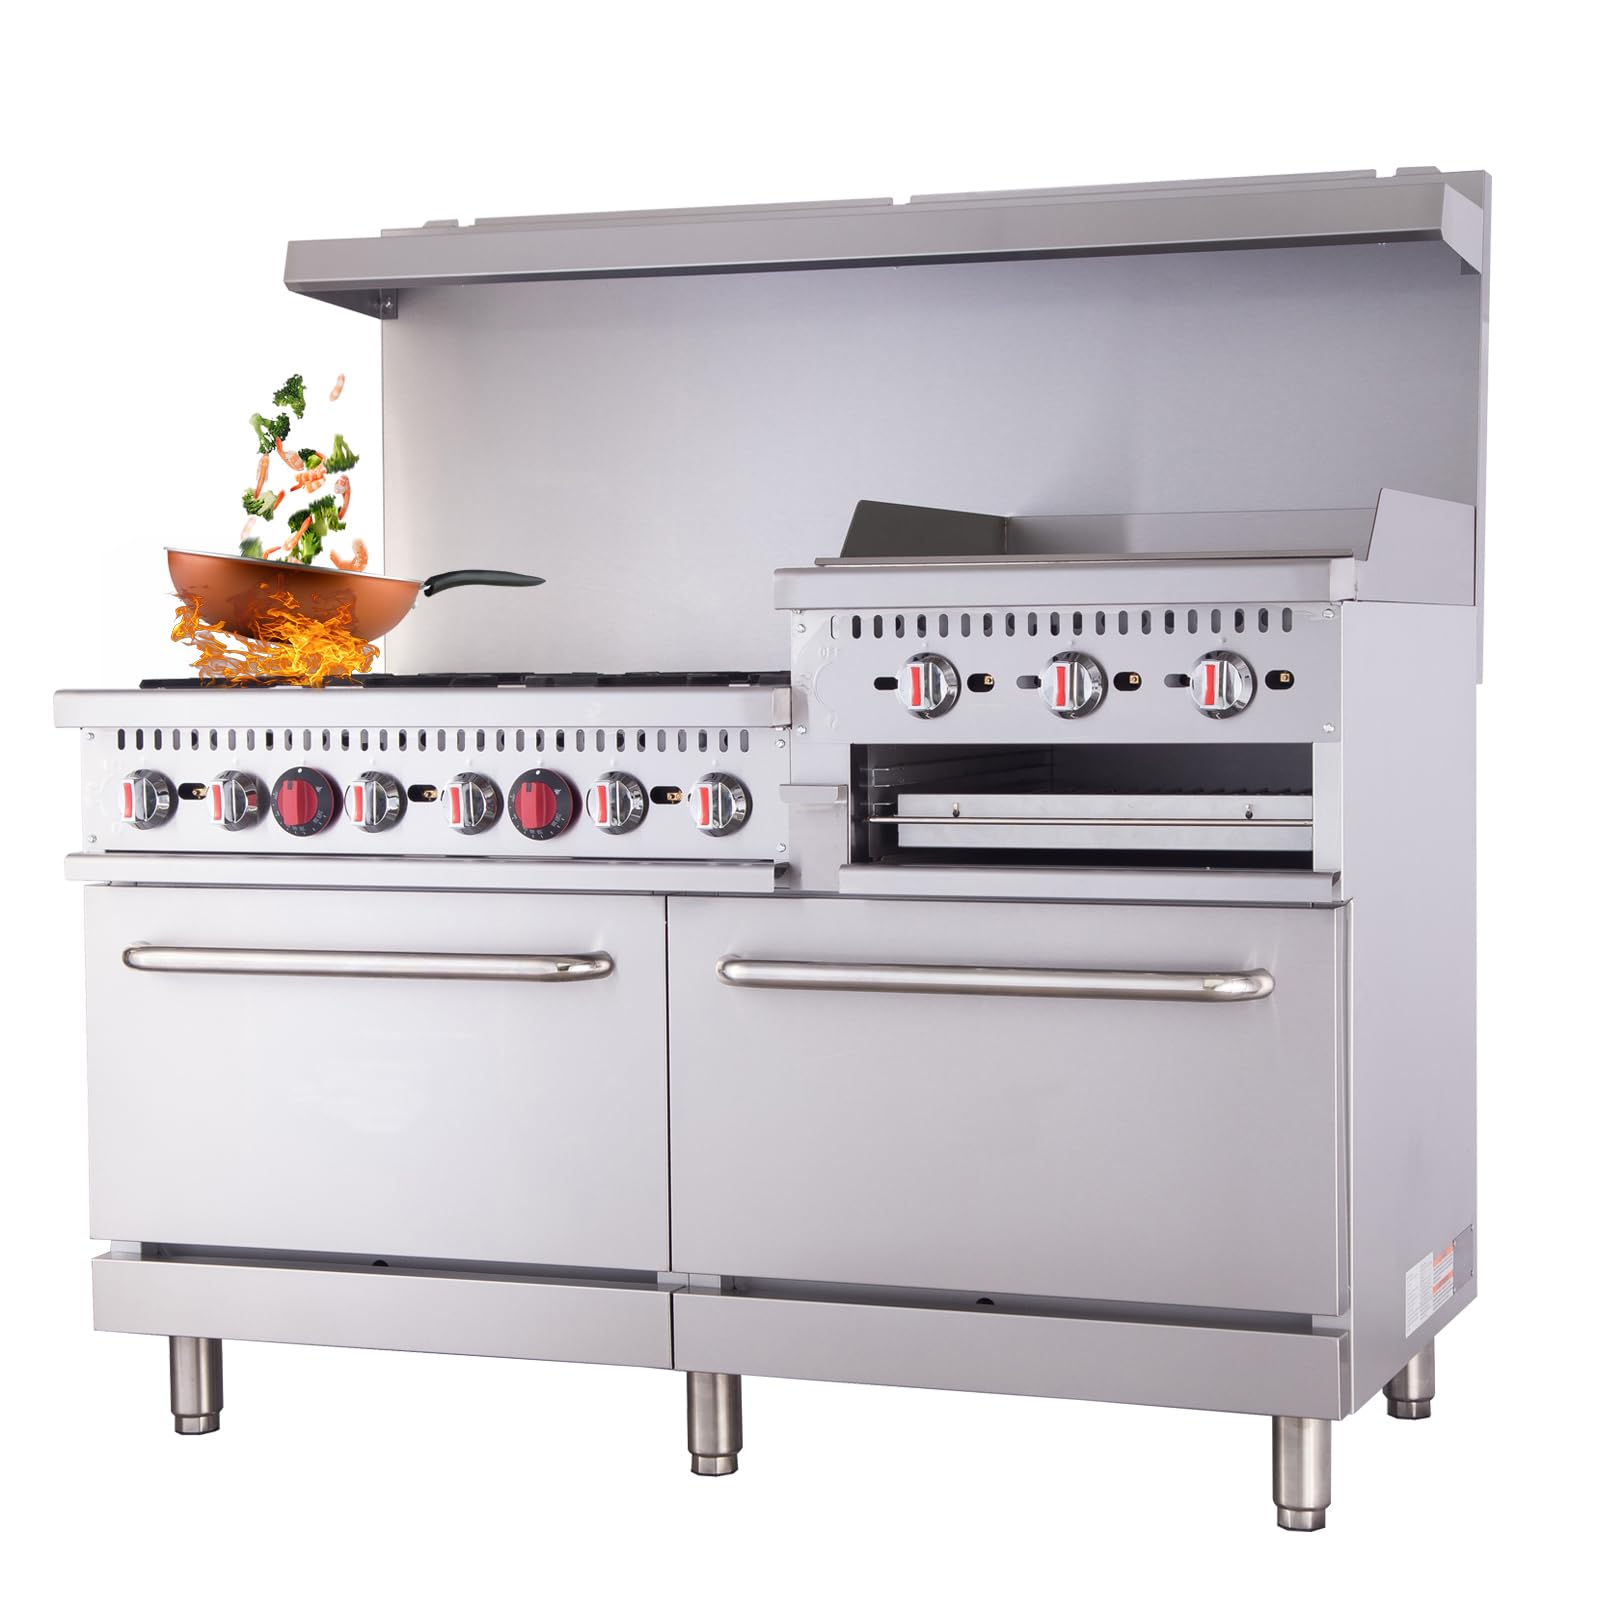 EasyRose Commercial 60" Liquid Propane Gas Range Stove 6 Burners with 24" Griddle